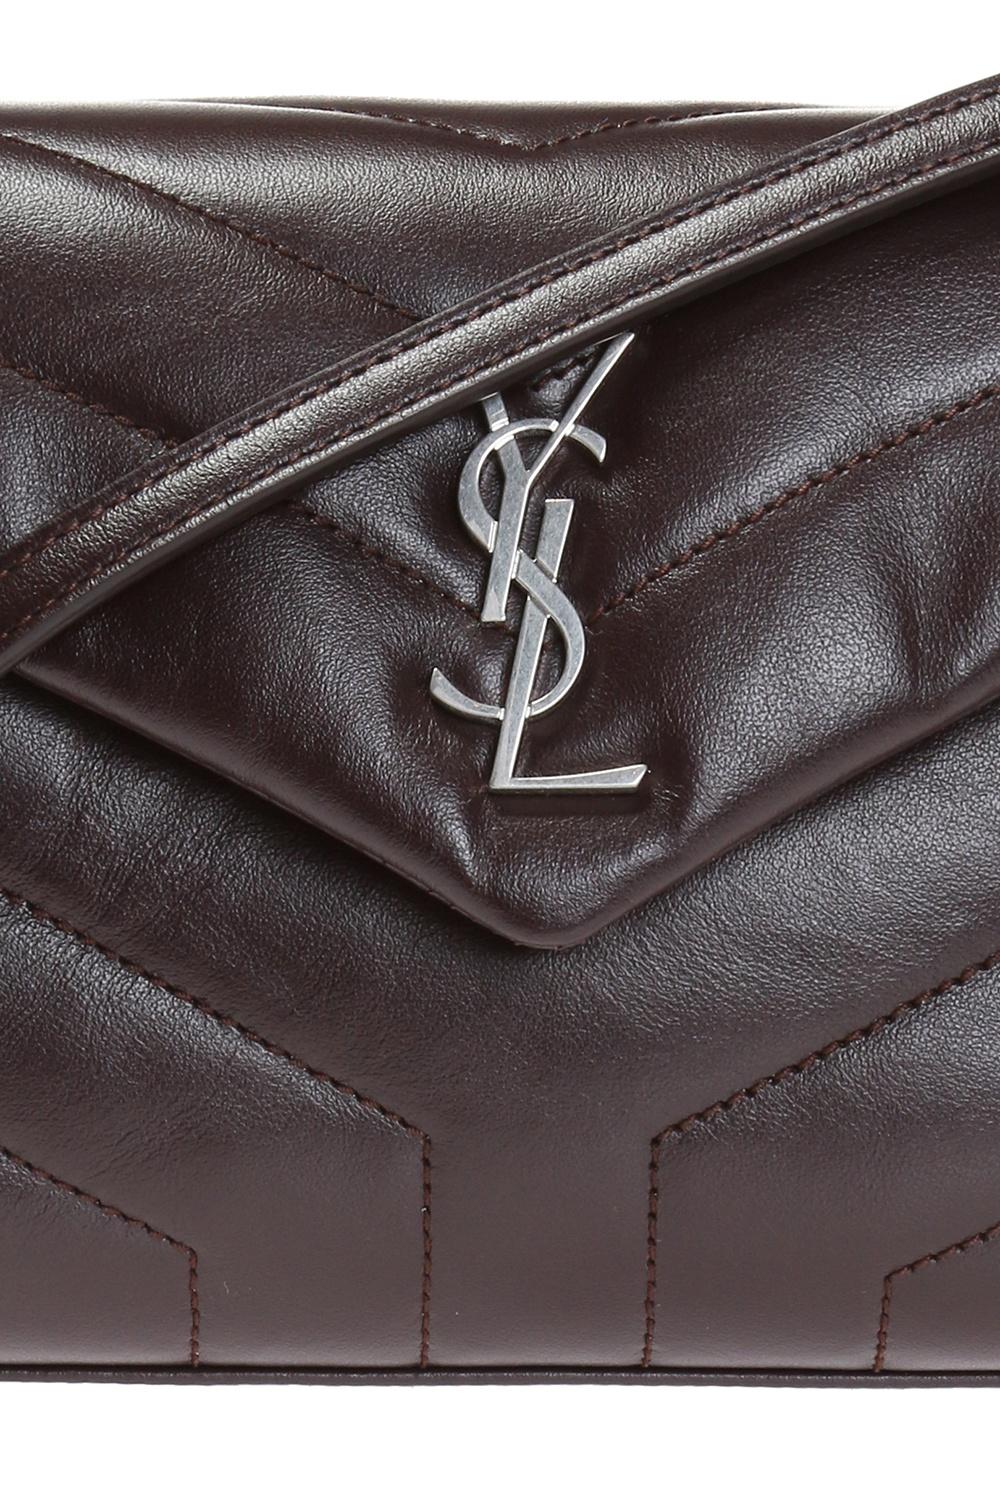 Saint Laurent Dark Brown / Plum Leather Loulou Toy Strap Shoulder Bag In New Condition In Paradise Island, BS